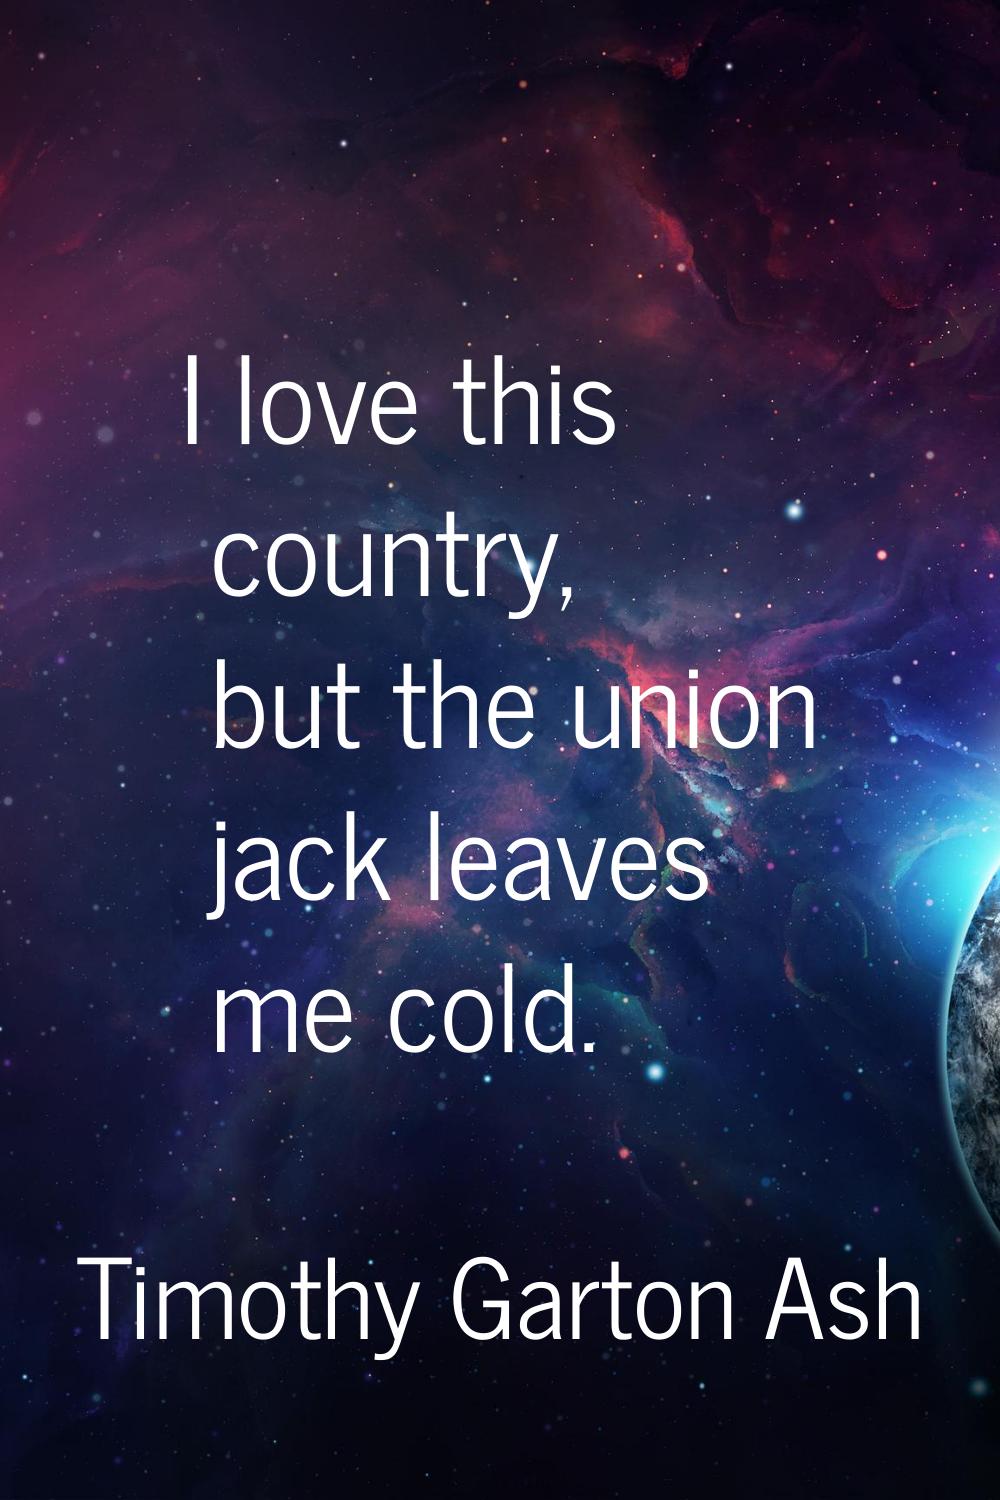 I love this country, but the union jack leaves me cold.